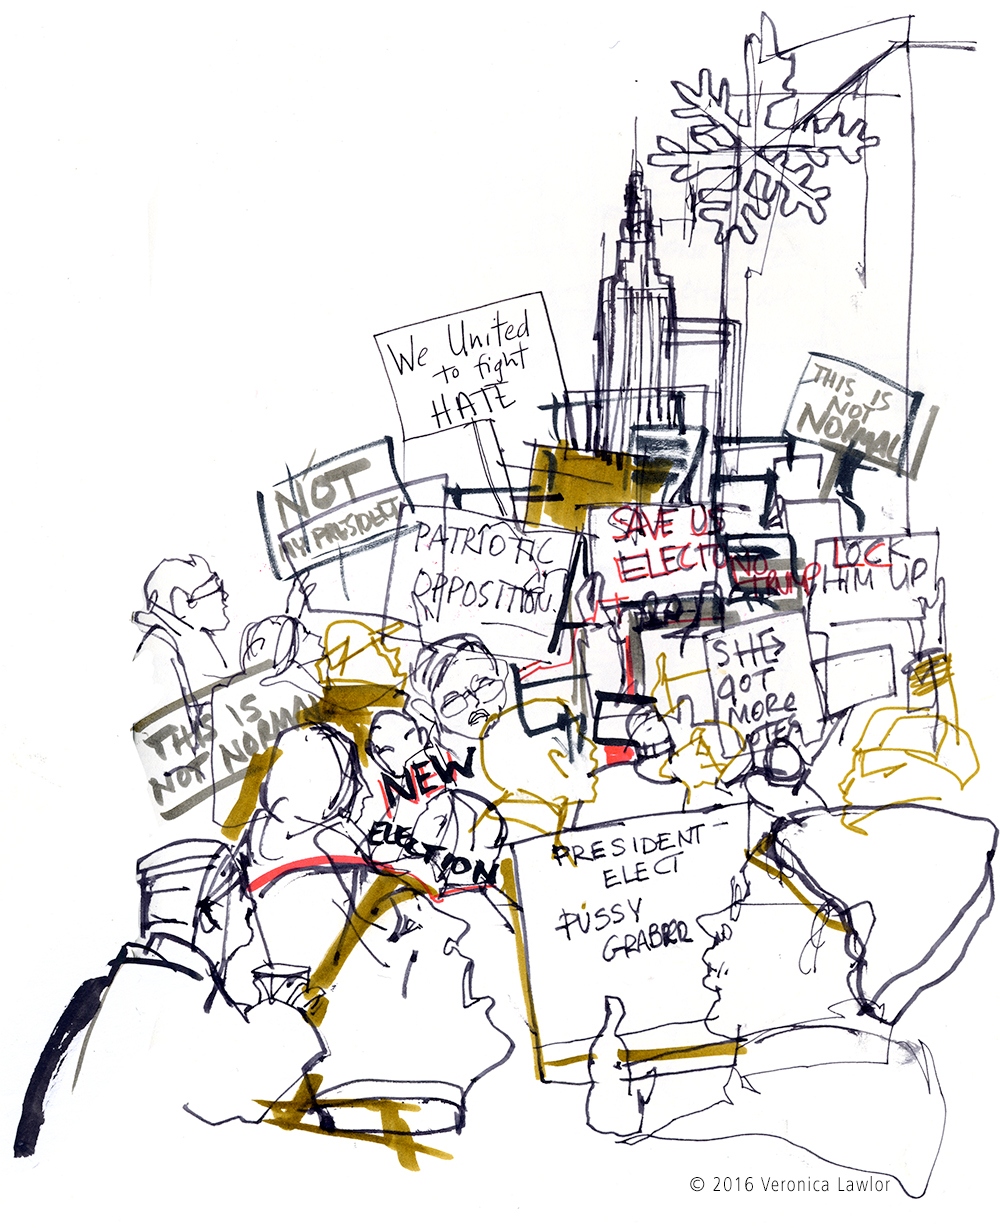 womens_protest_trump_5thave_1